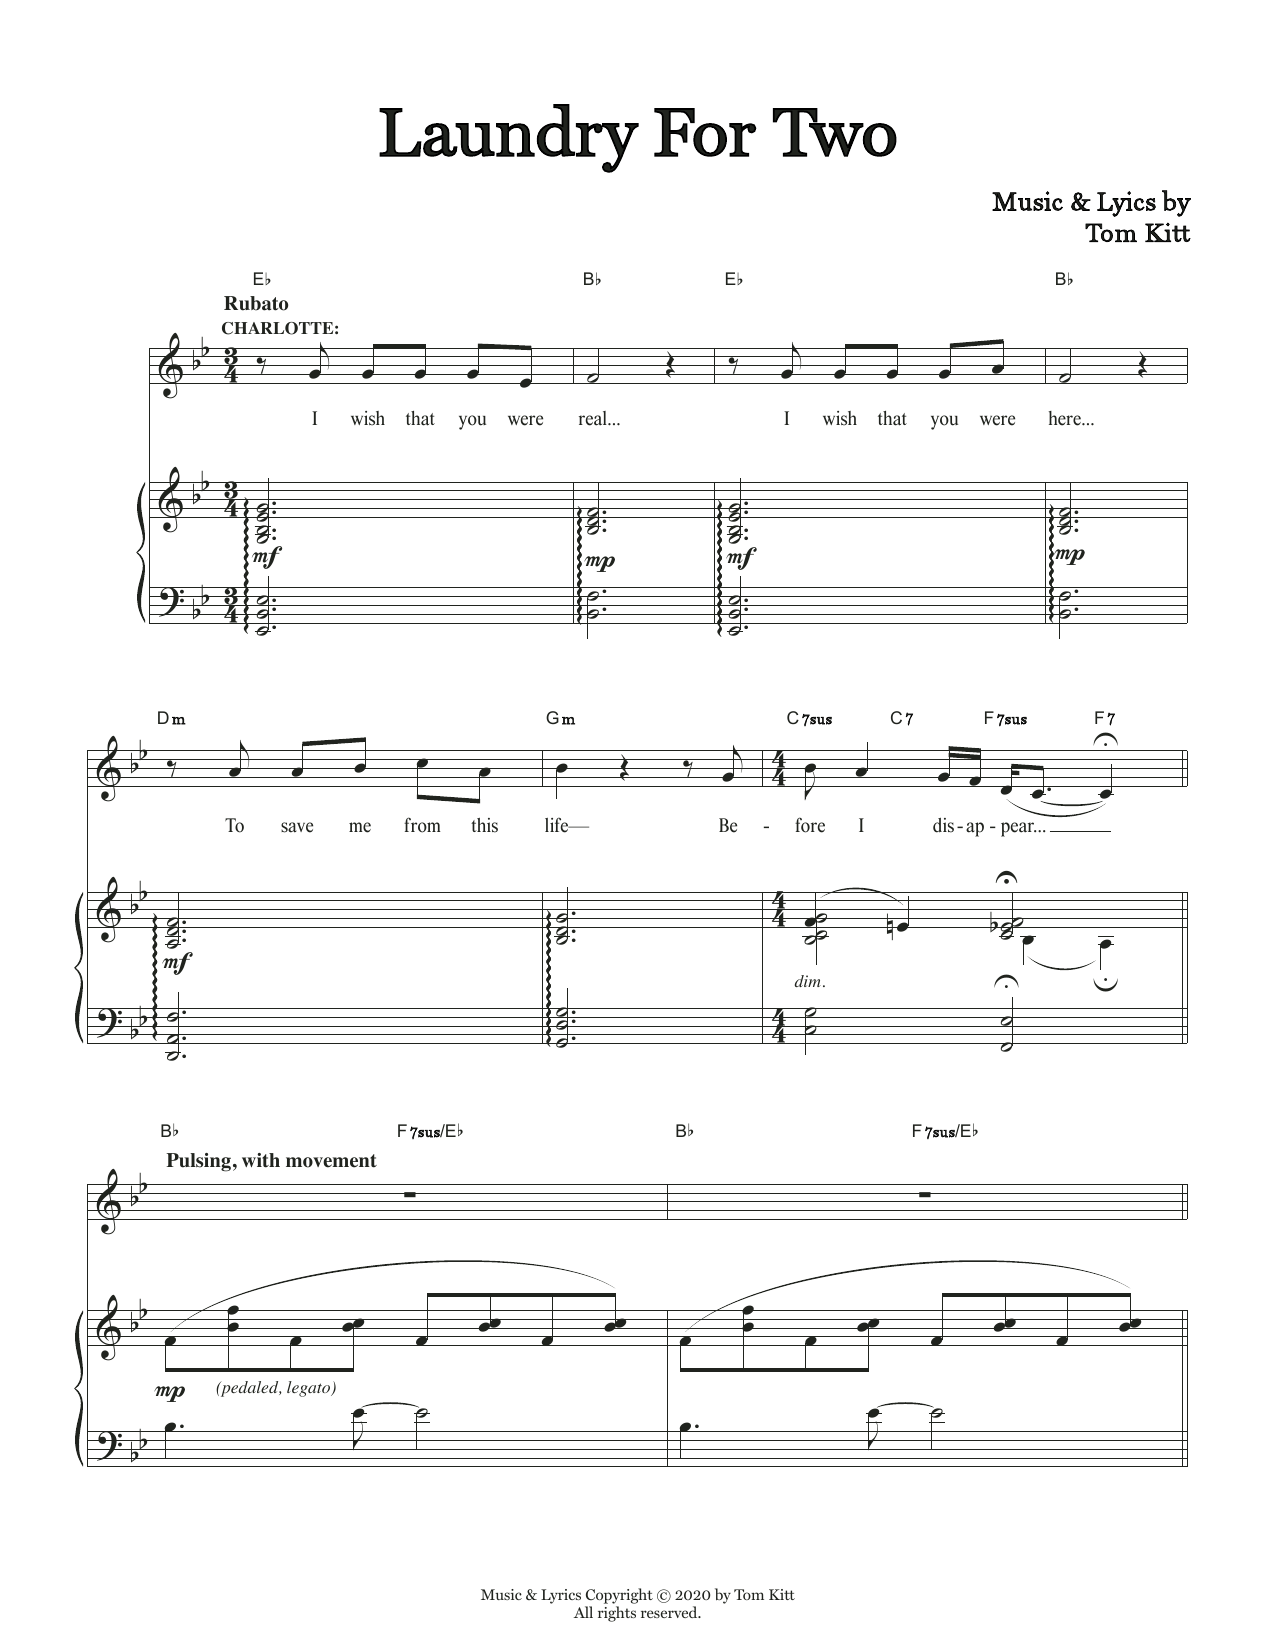 Download Tom Kitt Laundry For Two (from the musical Super Sheet Music